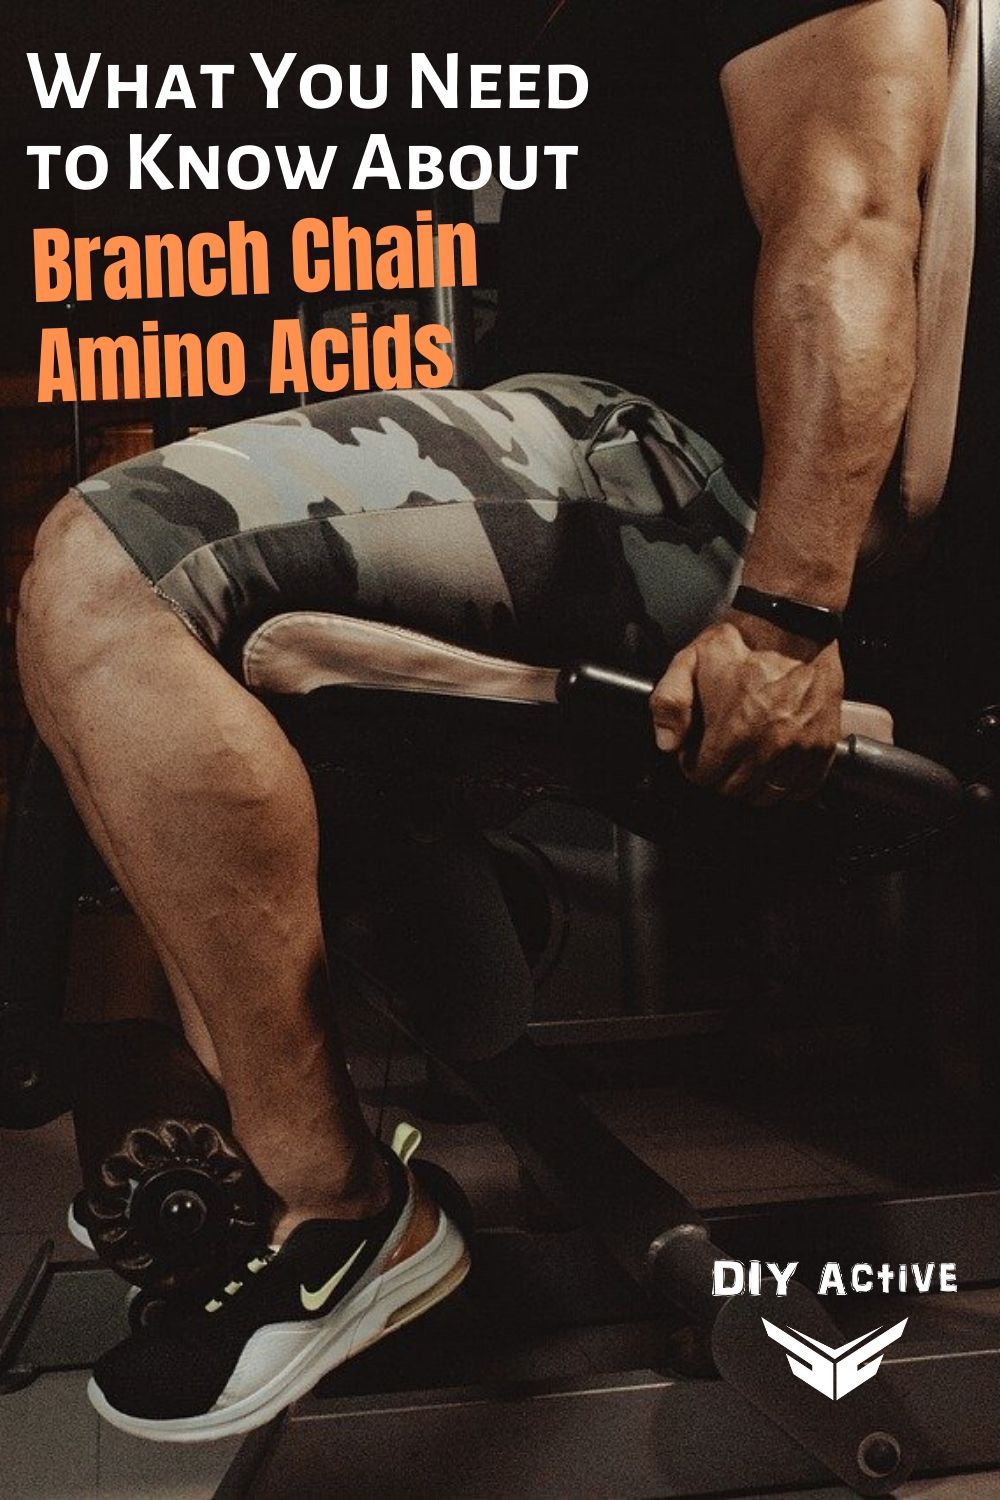 What You Need to Know About Branch Chain Amino Acids